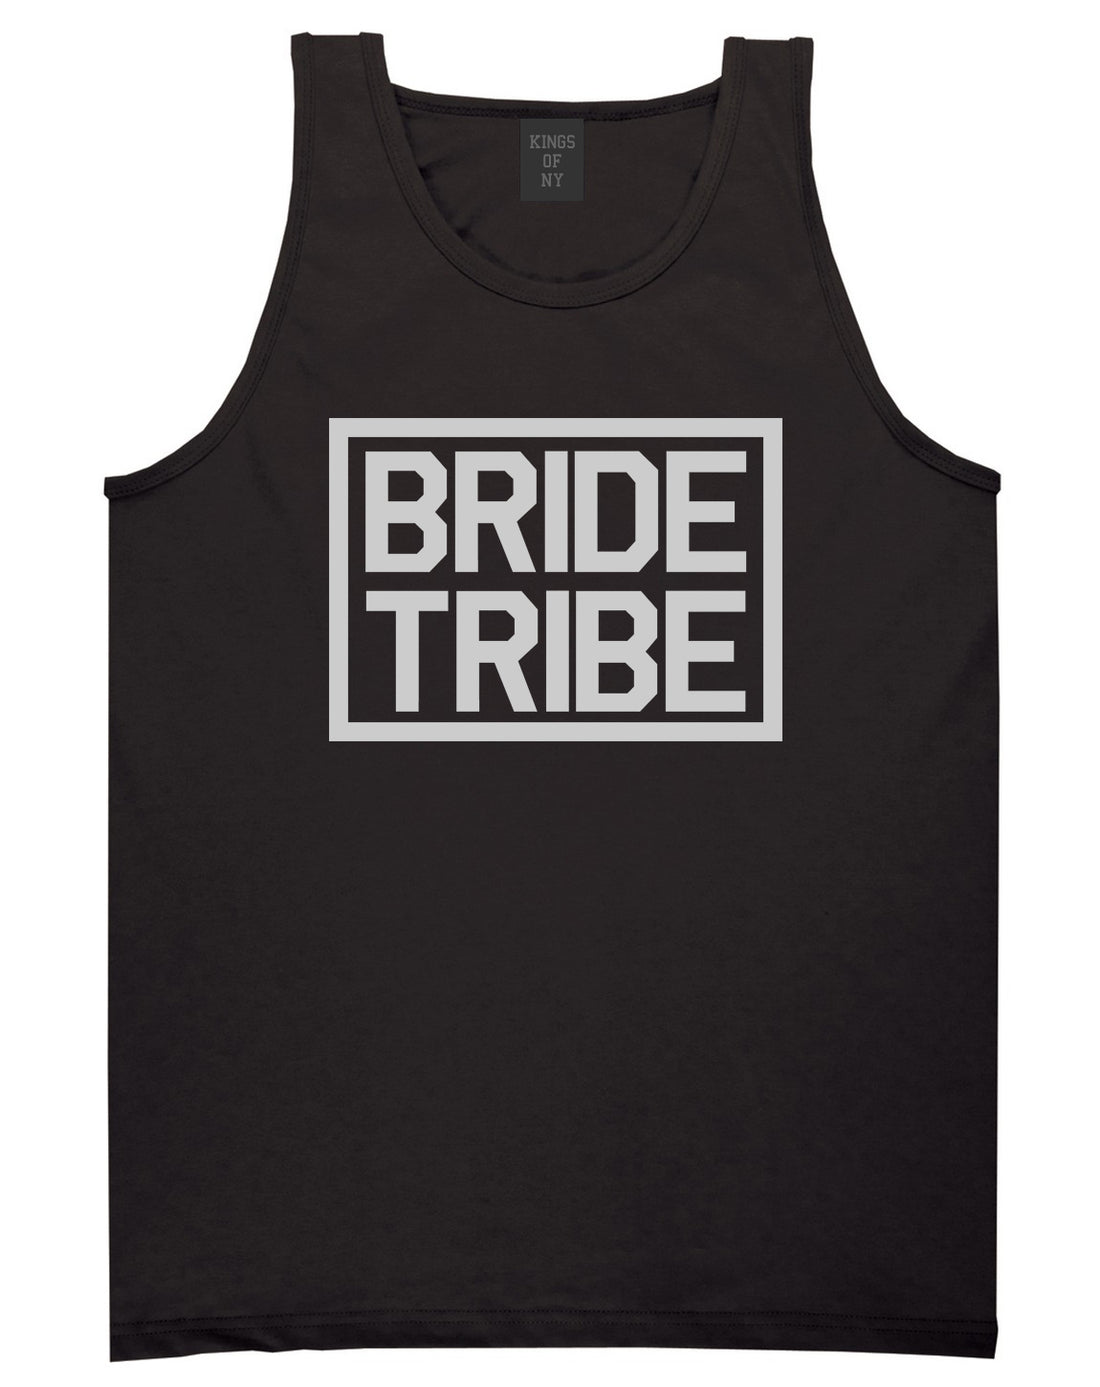 Bride Tribe Bachlorette Party Black Tank Top Shirt by Kings Of NY